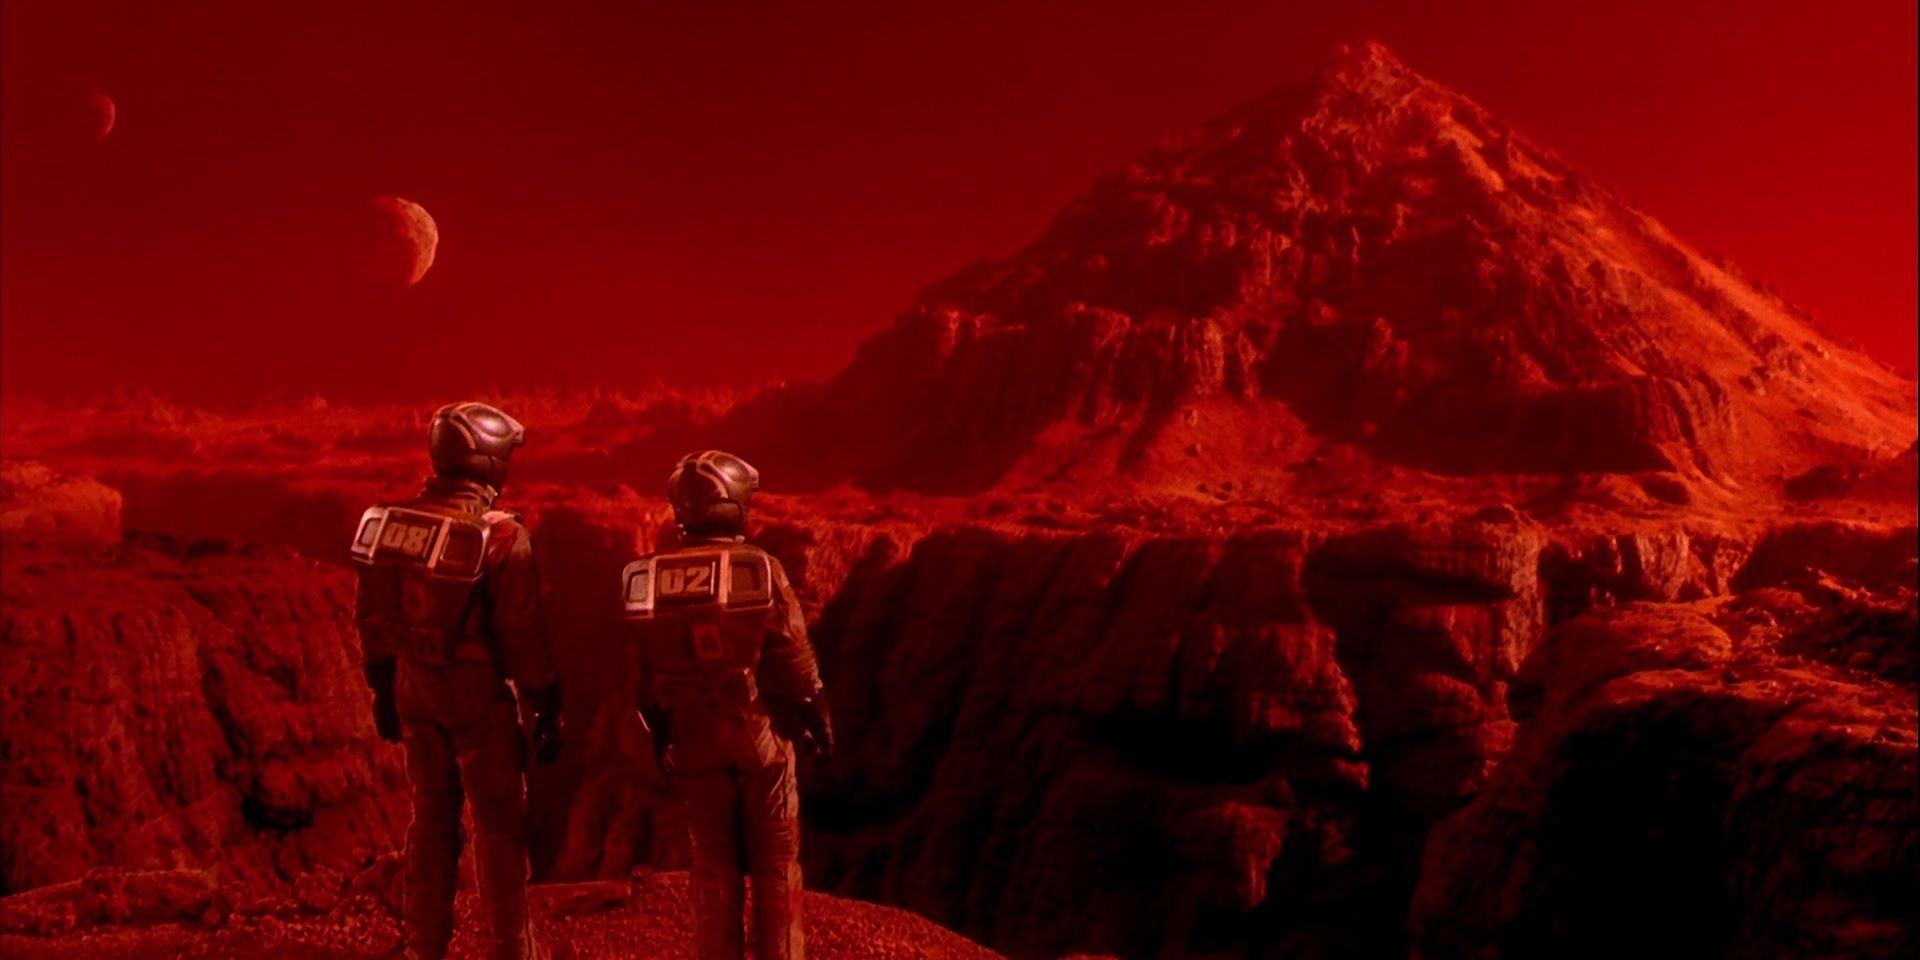 The Martian landscape in Total Recall